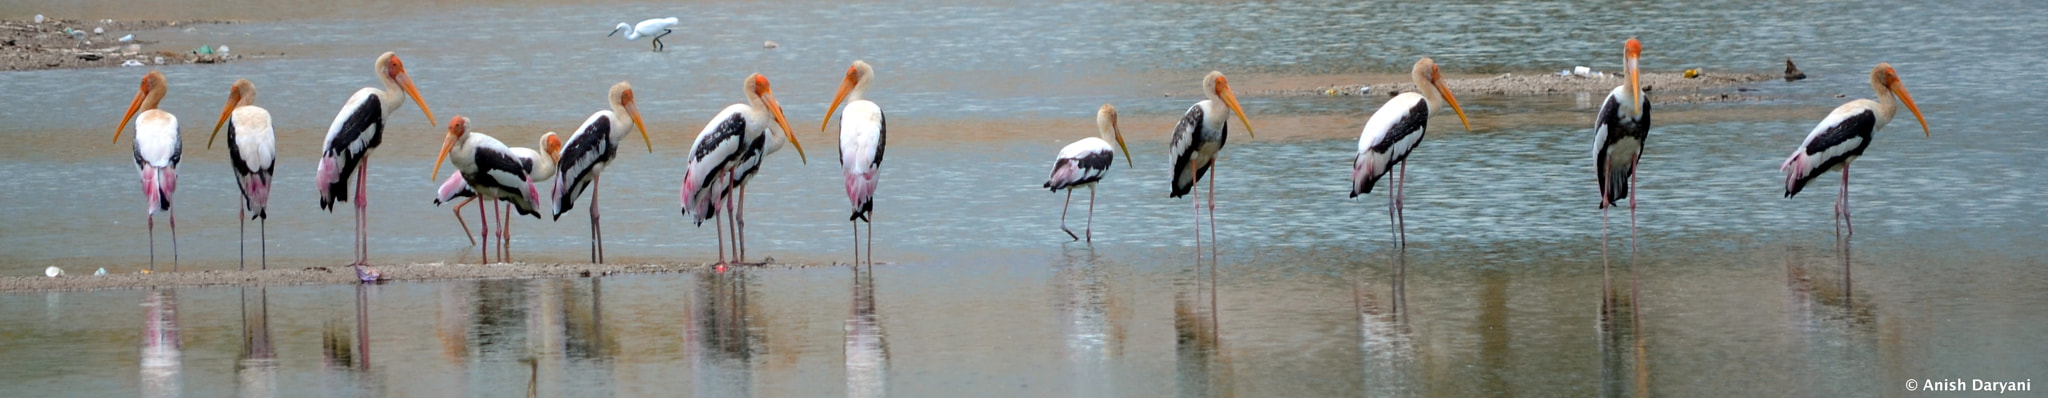 Nikon D5100 sample photo. Painted storks (standing tall together) photography